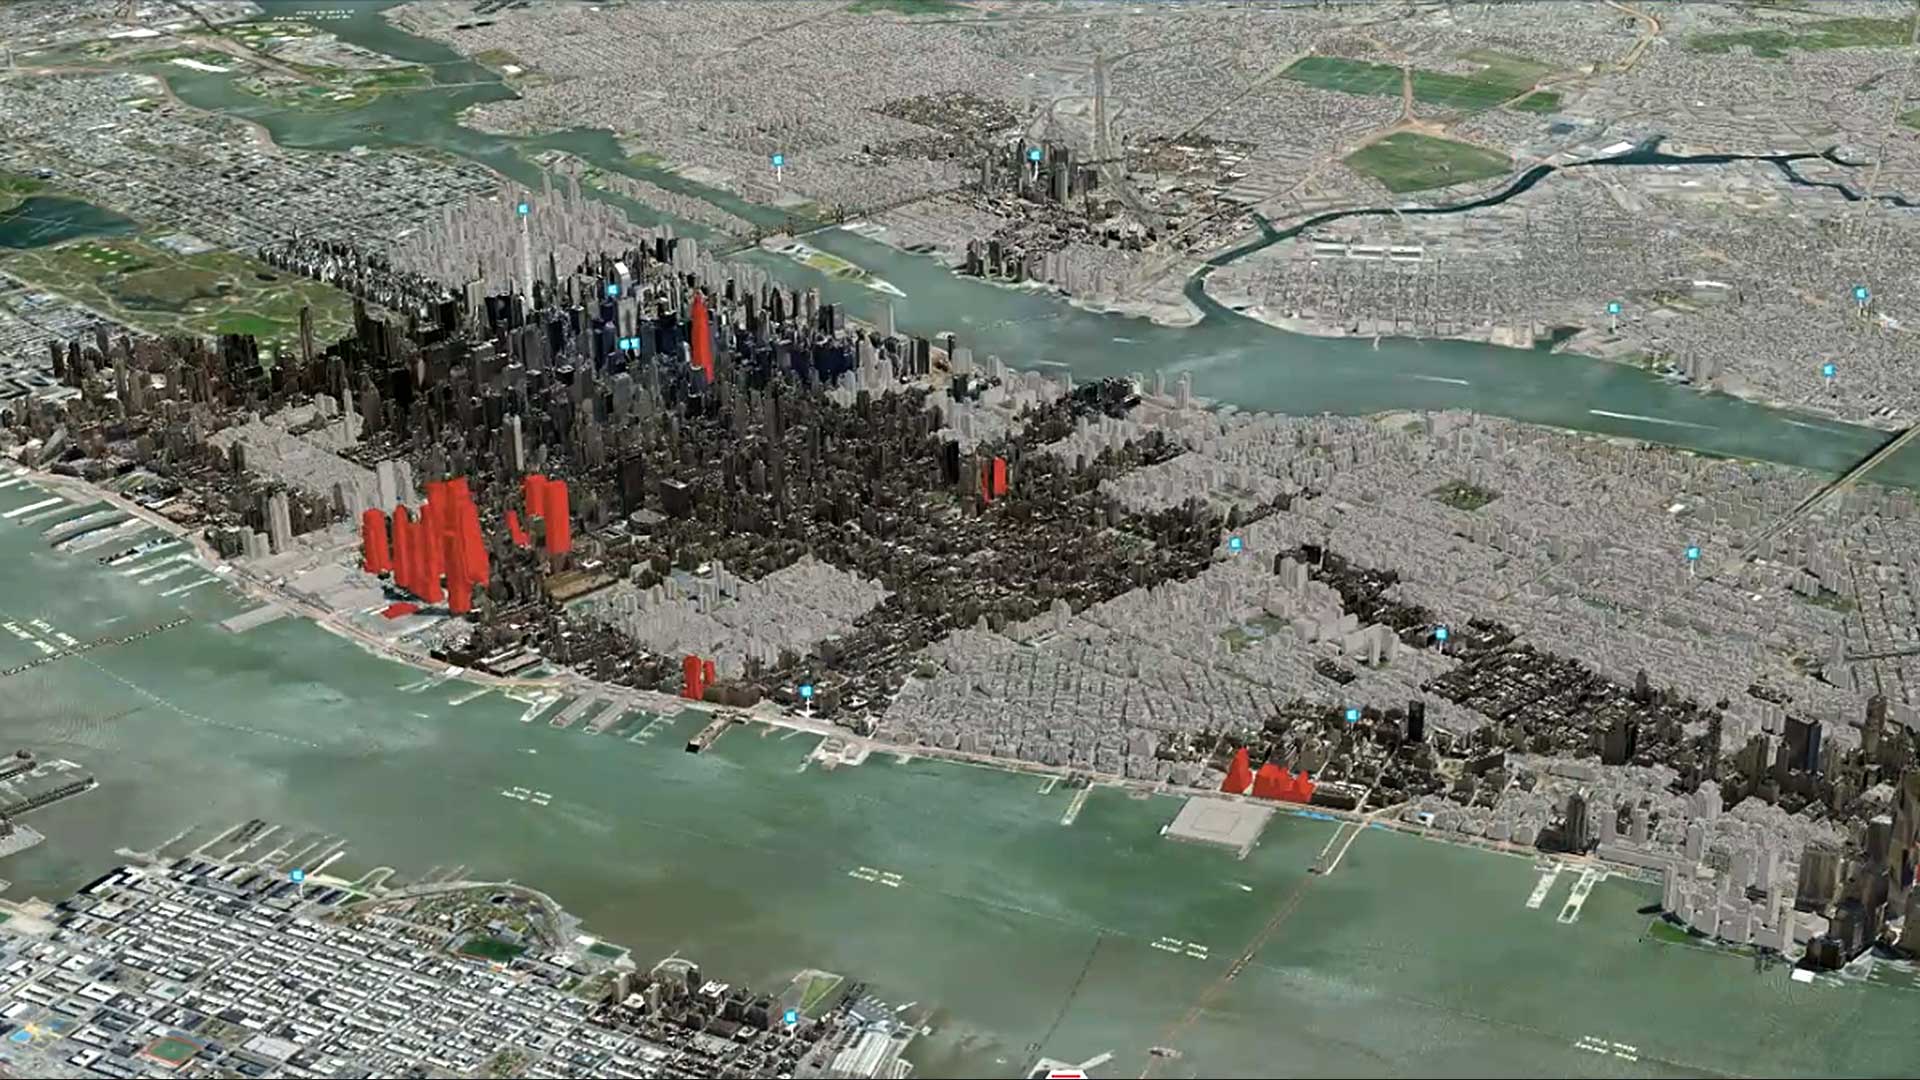 A 3D model of New York City's corporate real estate